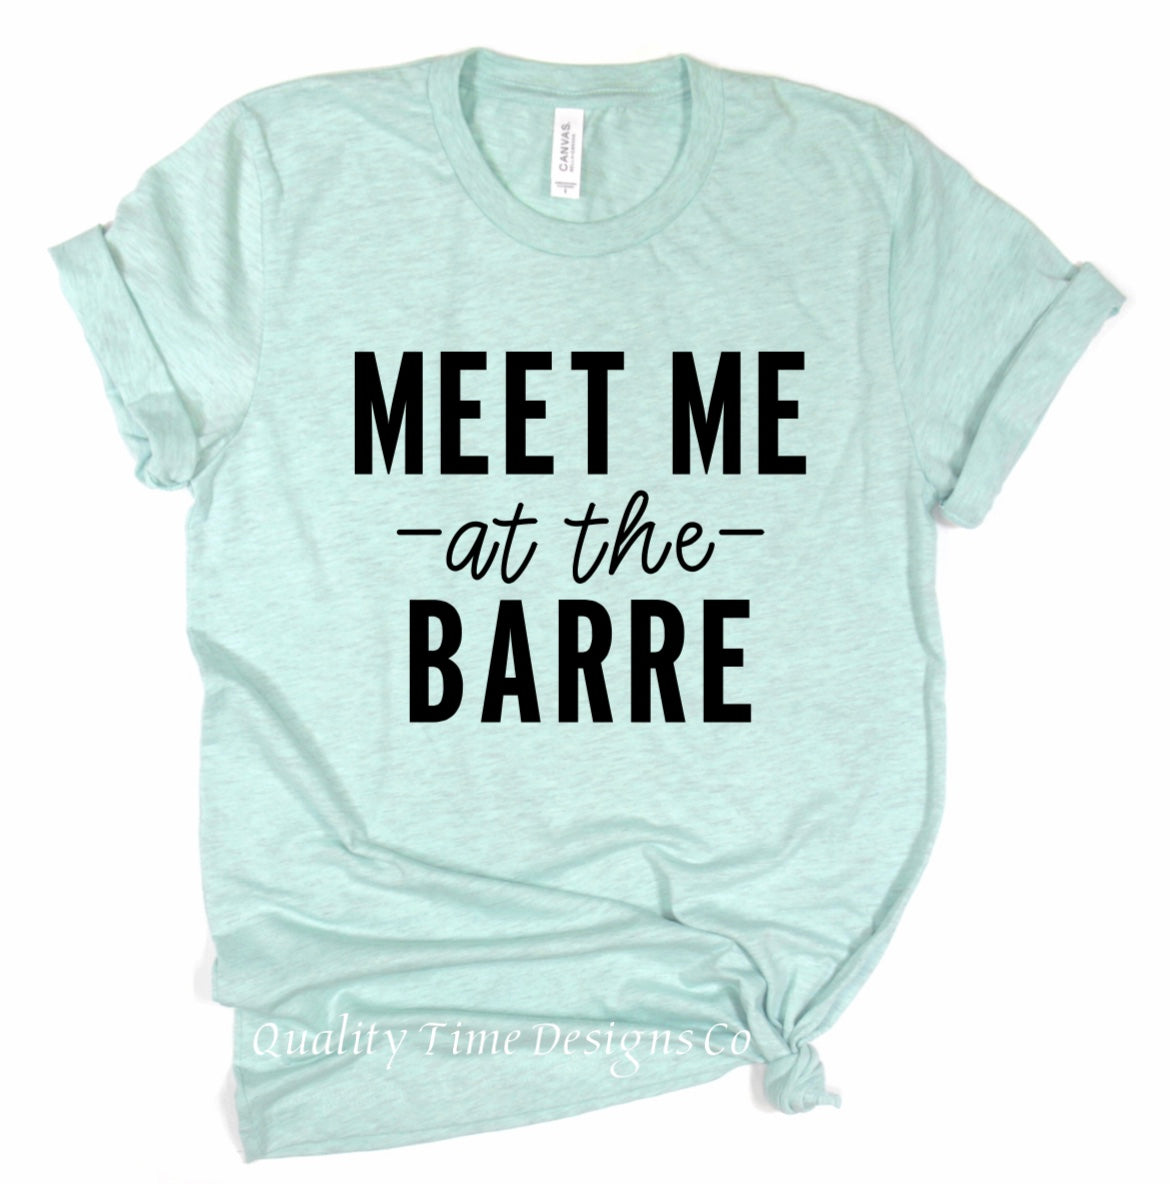 Meet Me at the Barre t-shirt 